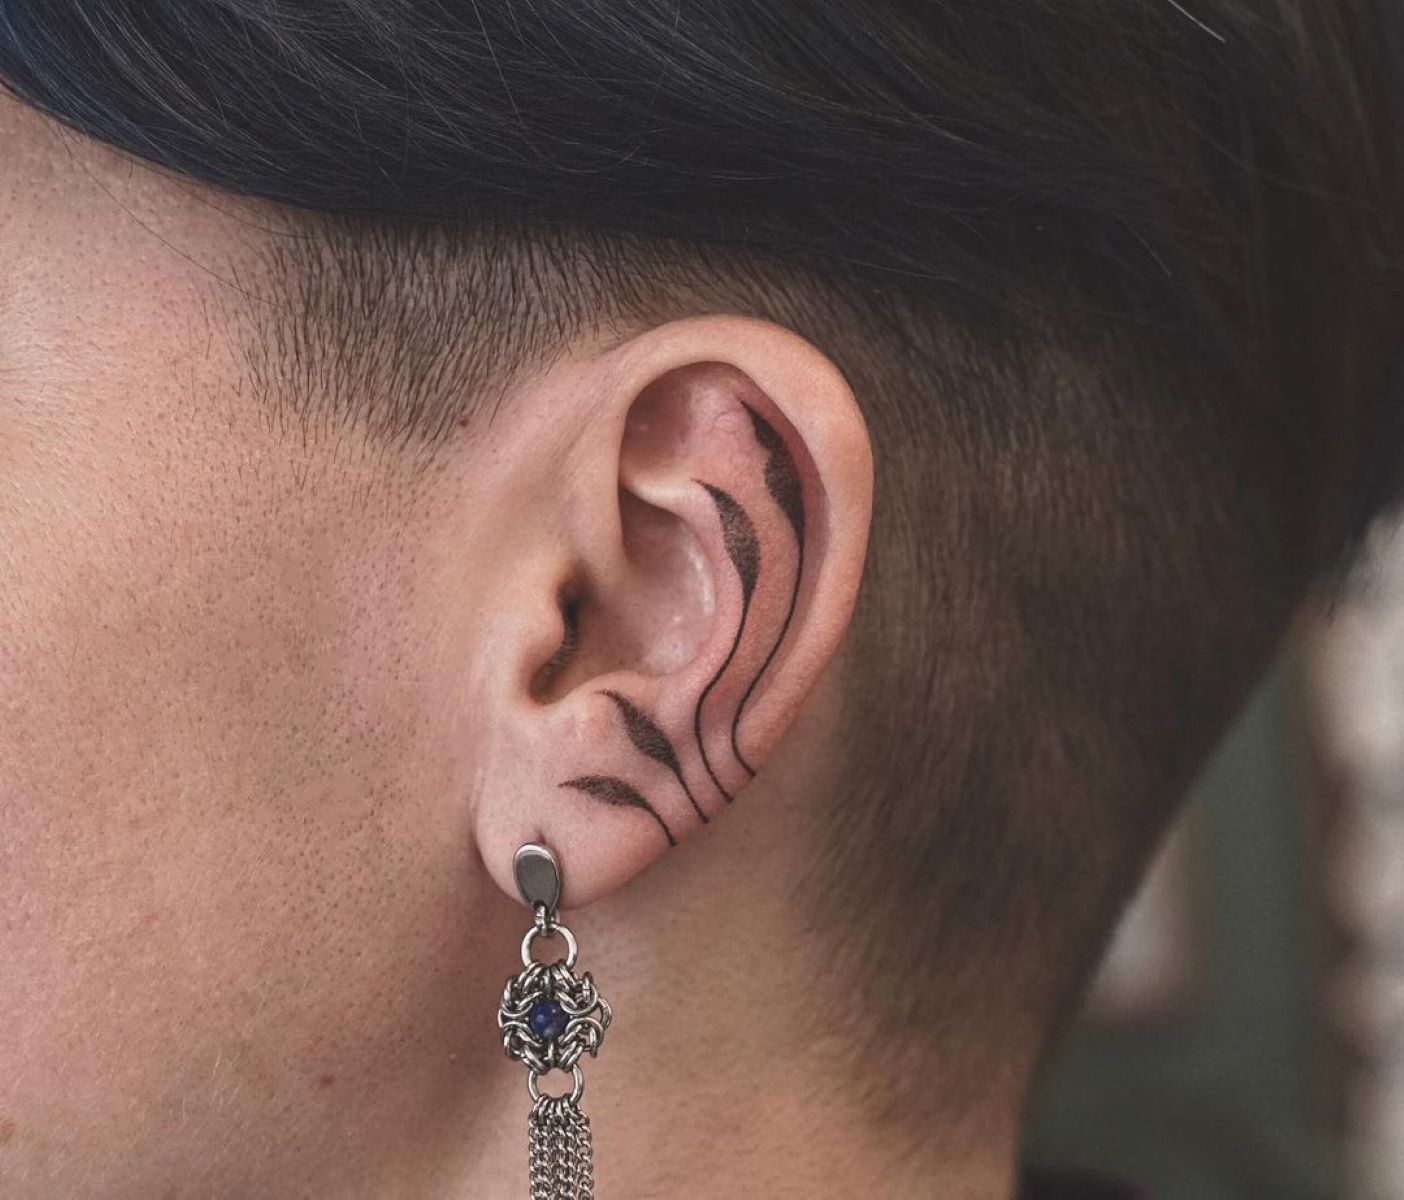 The Hidden Meaning Behind Ear Tattoos Revealed!